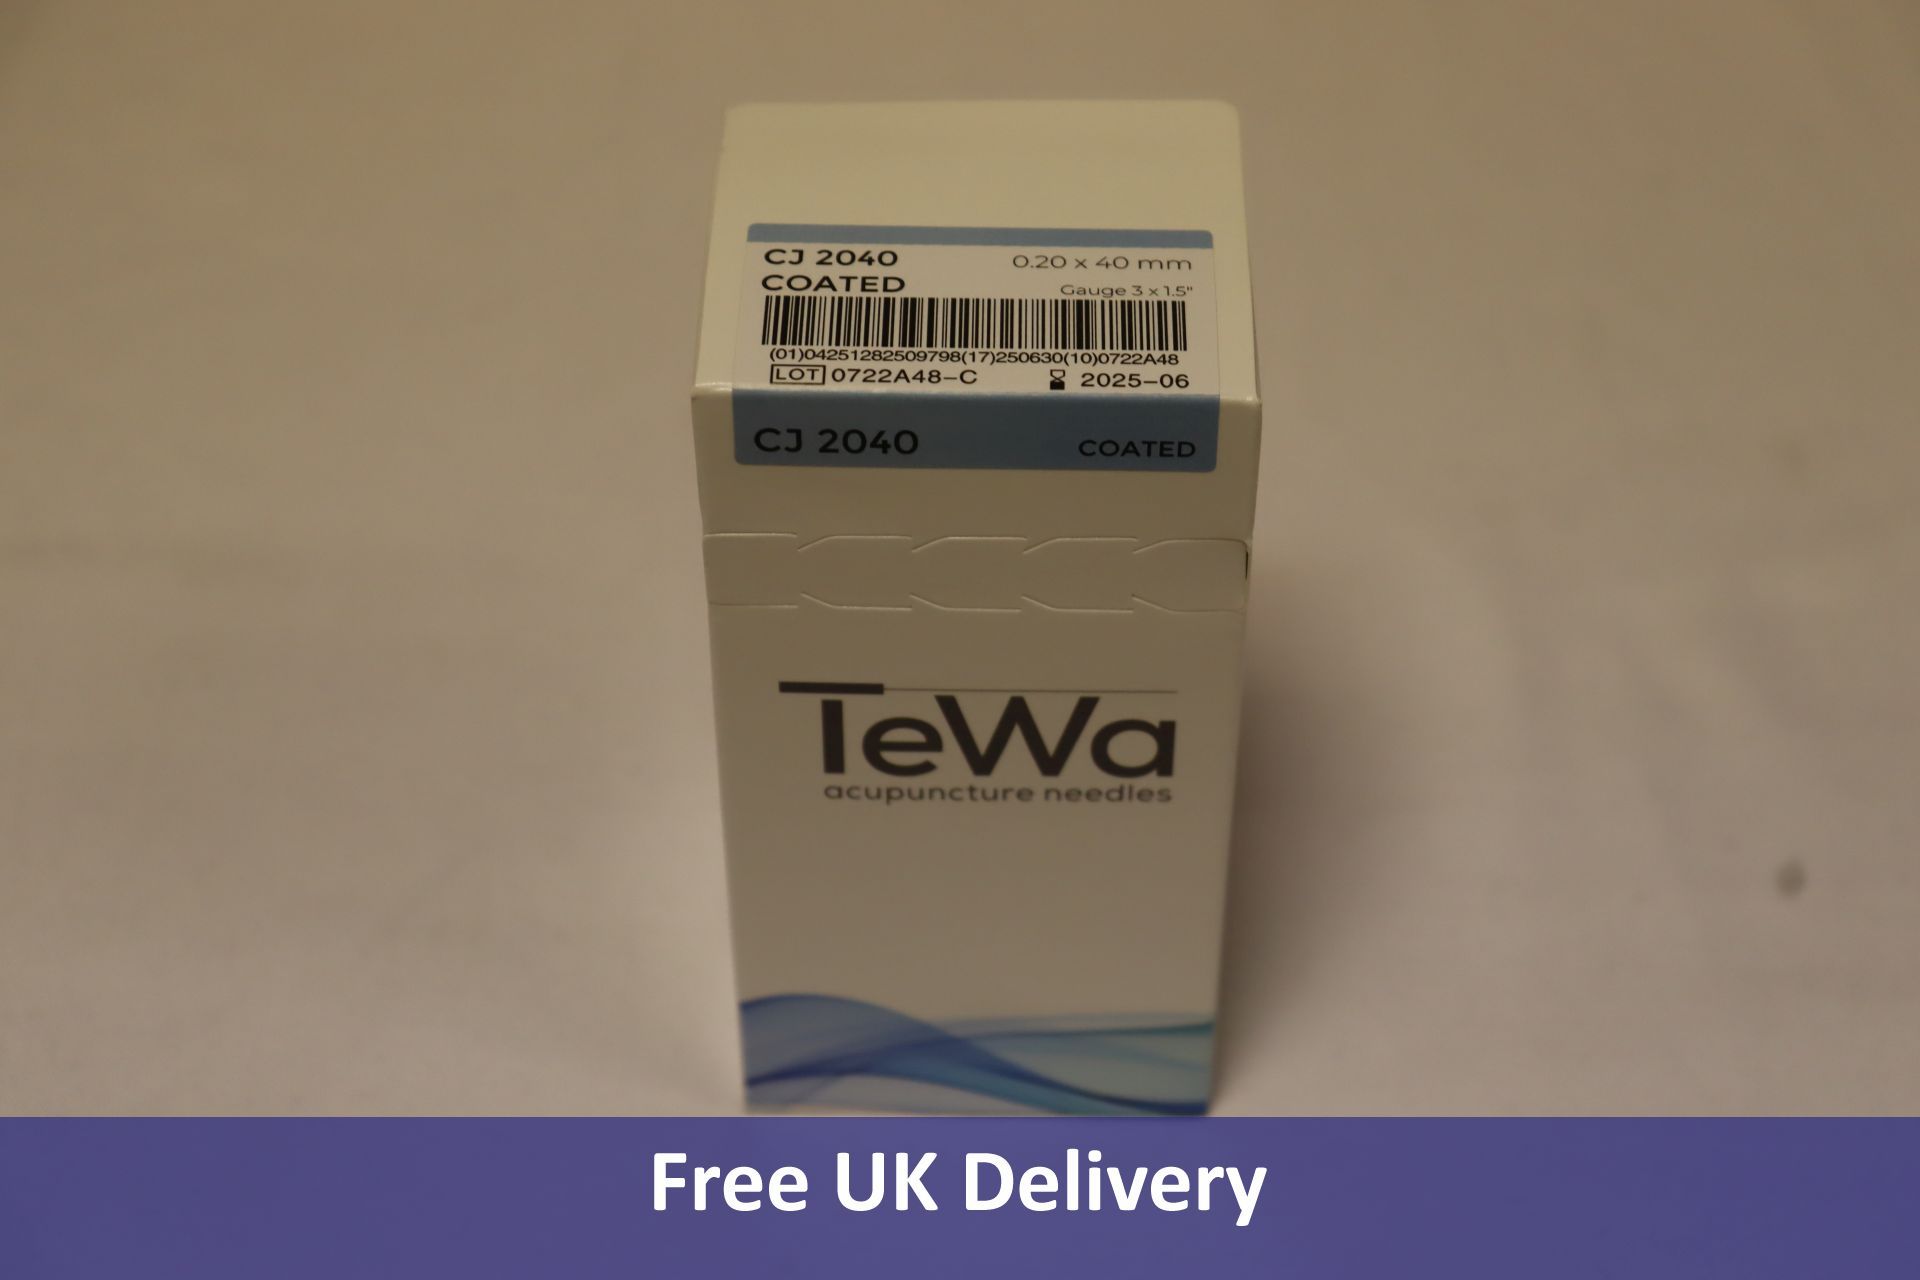 Ten-thousand Tewa Acupuncture Needles, 0.20 x 40mm, in 100 packs of 100 - Image 3 of 10